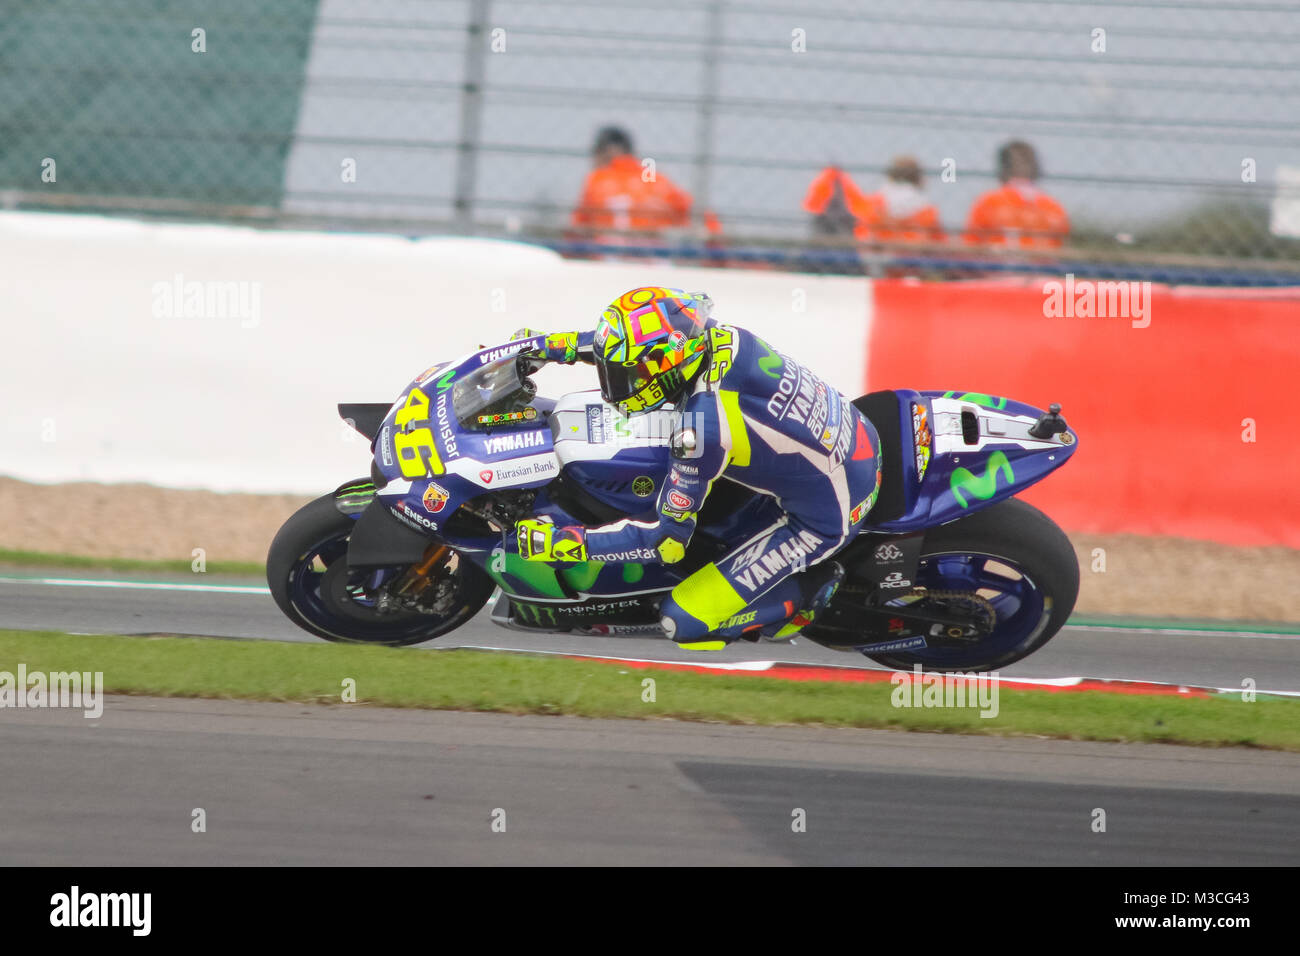 Valentino Rossi on the way to setting a quick time in qualifying at the MotoGP British Grand Prix 2016 Stock Photo